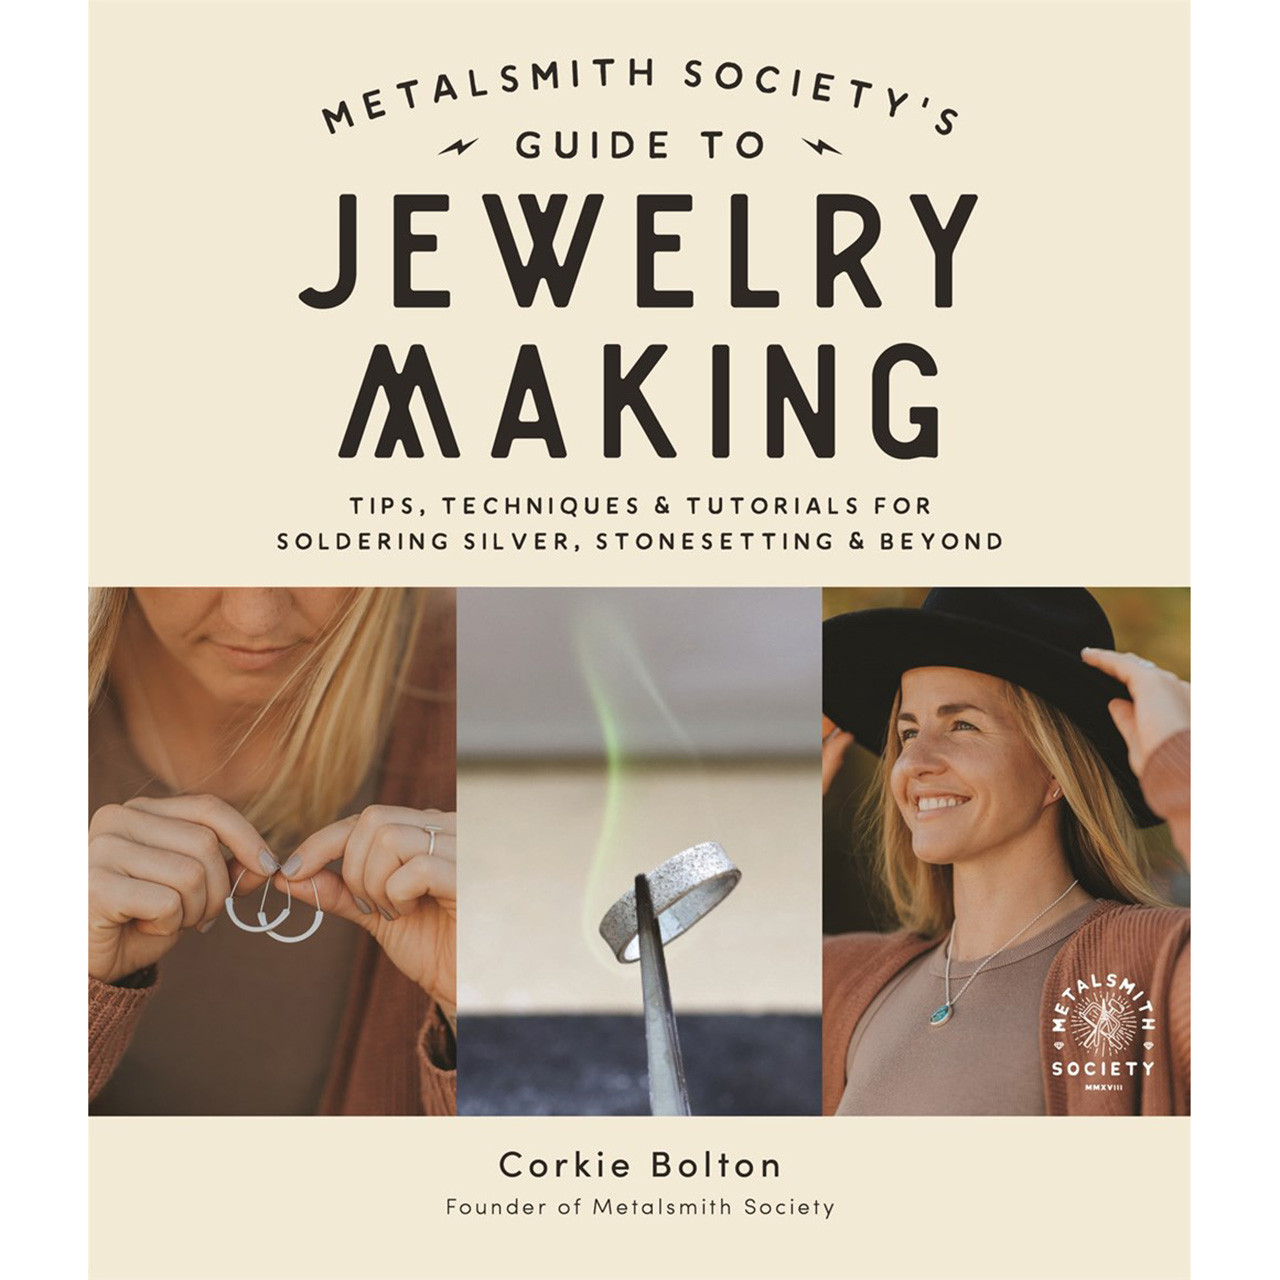 Metalsmith Society’s Guide to Jewelry Making - by Corkie Bolton